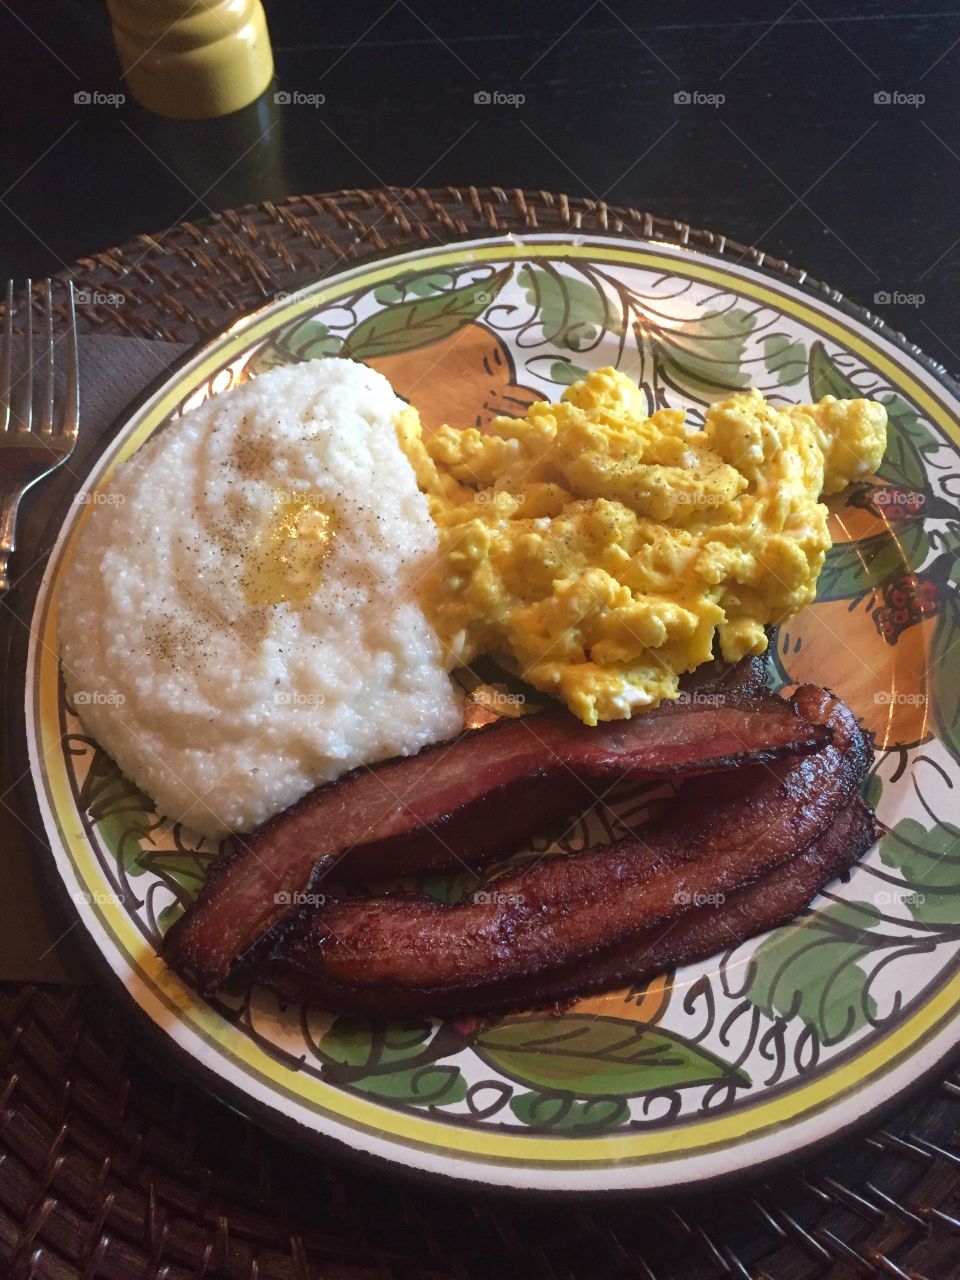 Grits and eggs